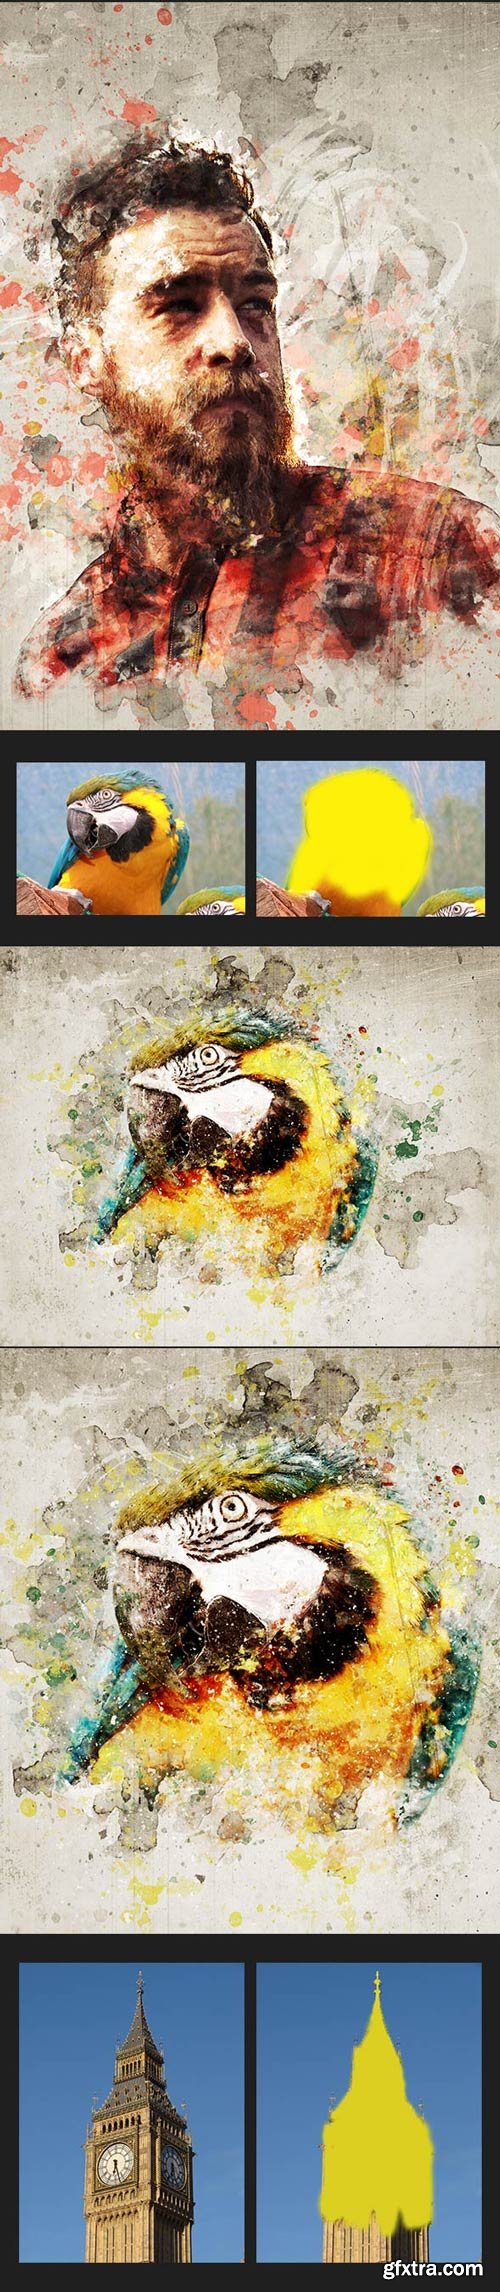 GraphicRiver - Mixed Art Photoshop Action - 17961479